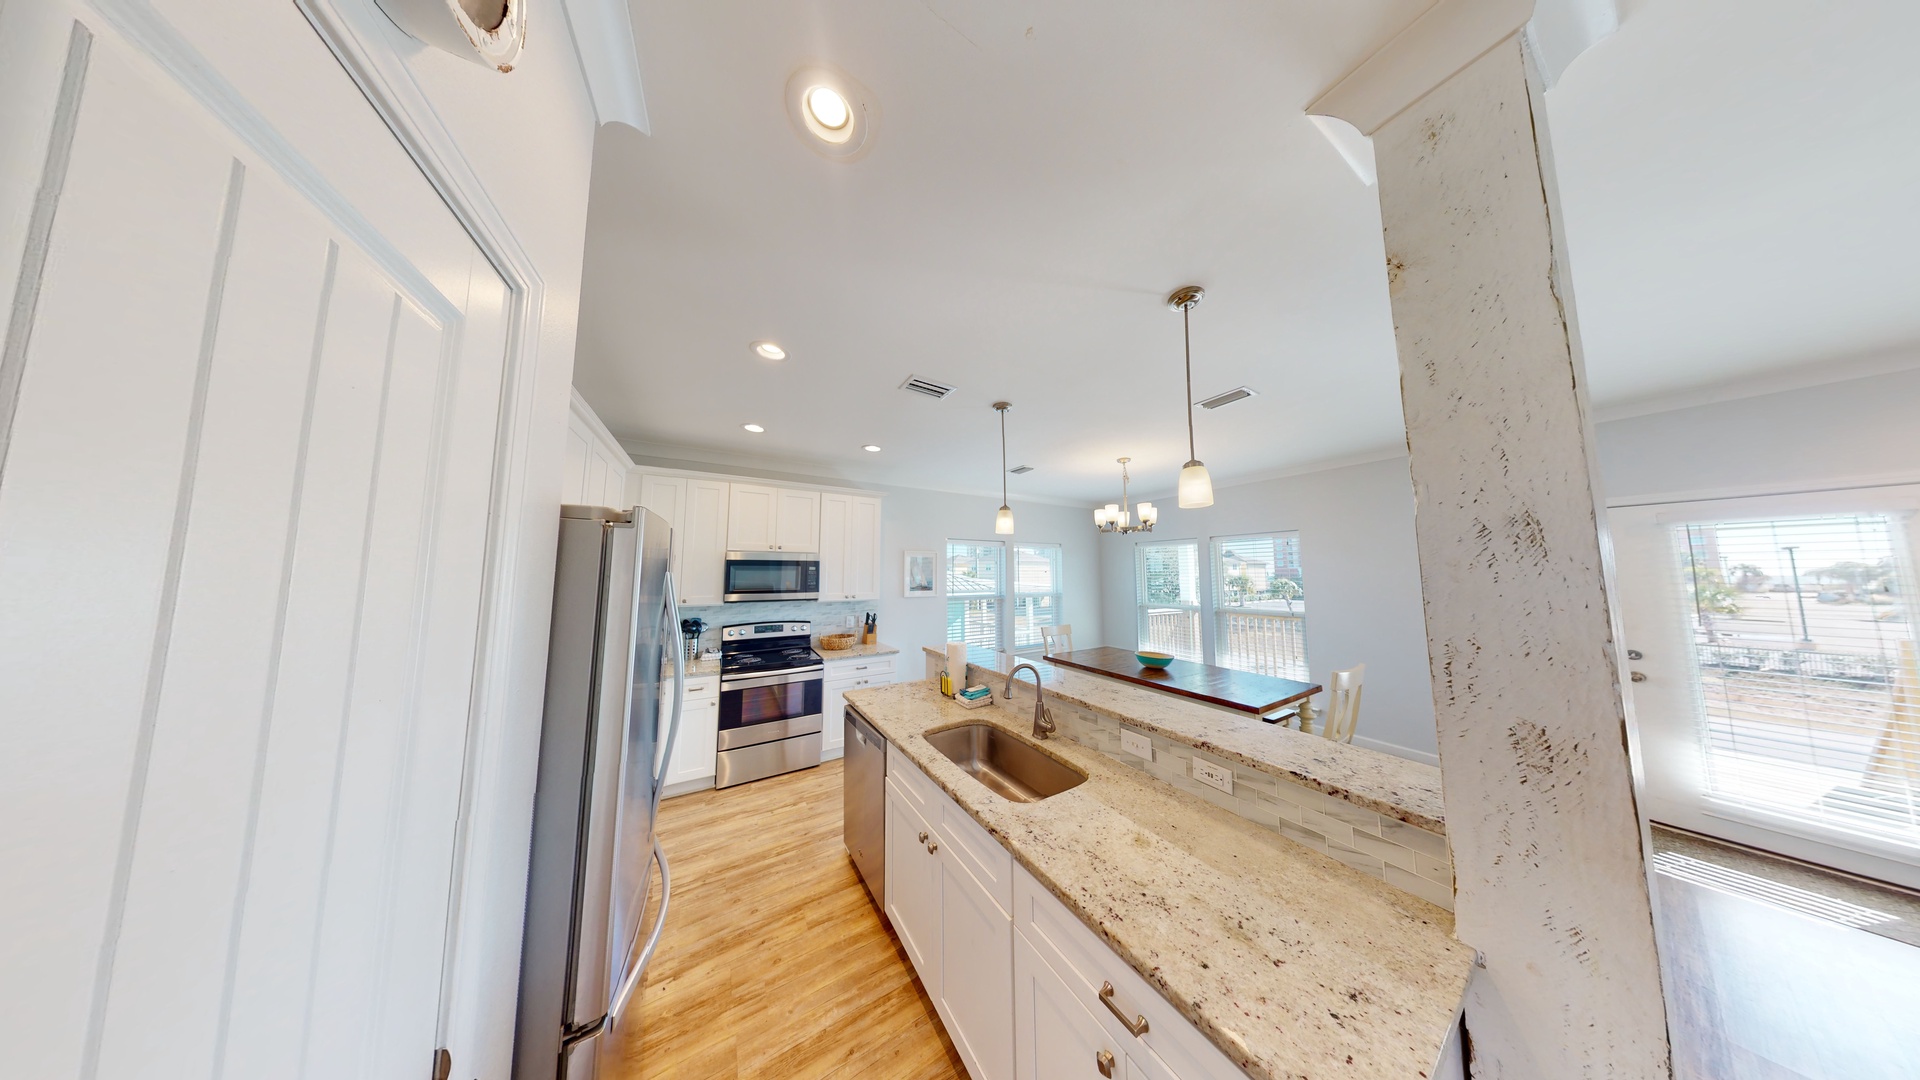 The updated kitchen features stainless appliances, beautiful backsplash and stone countertops